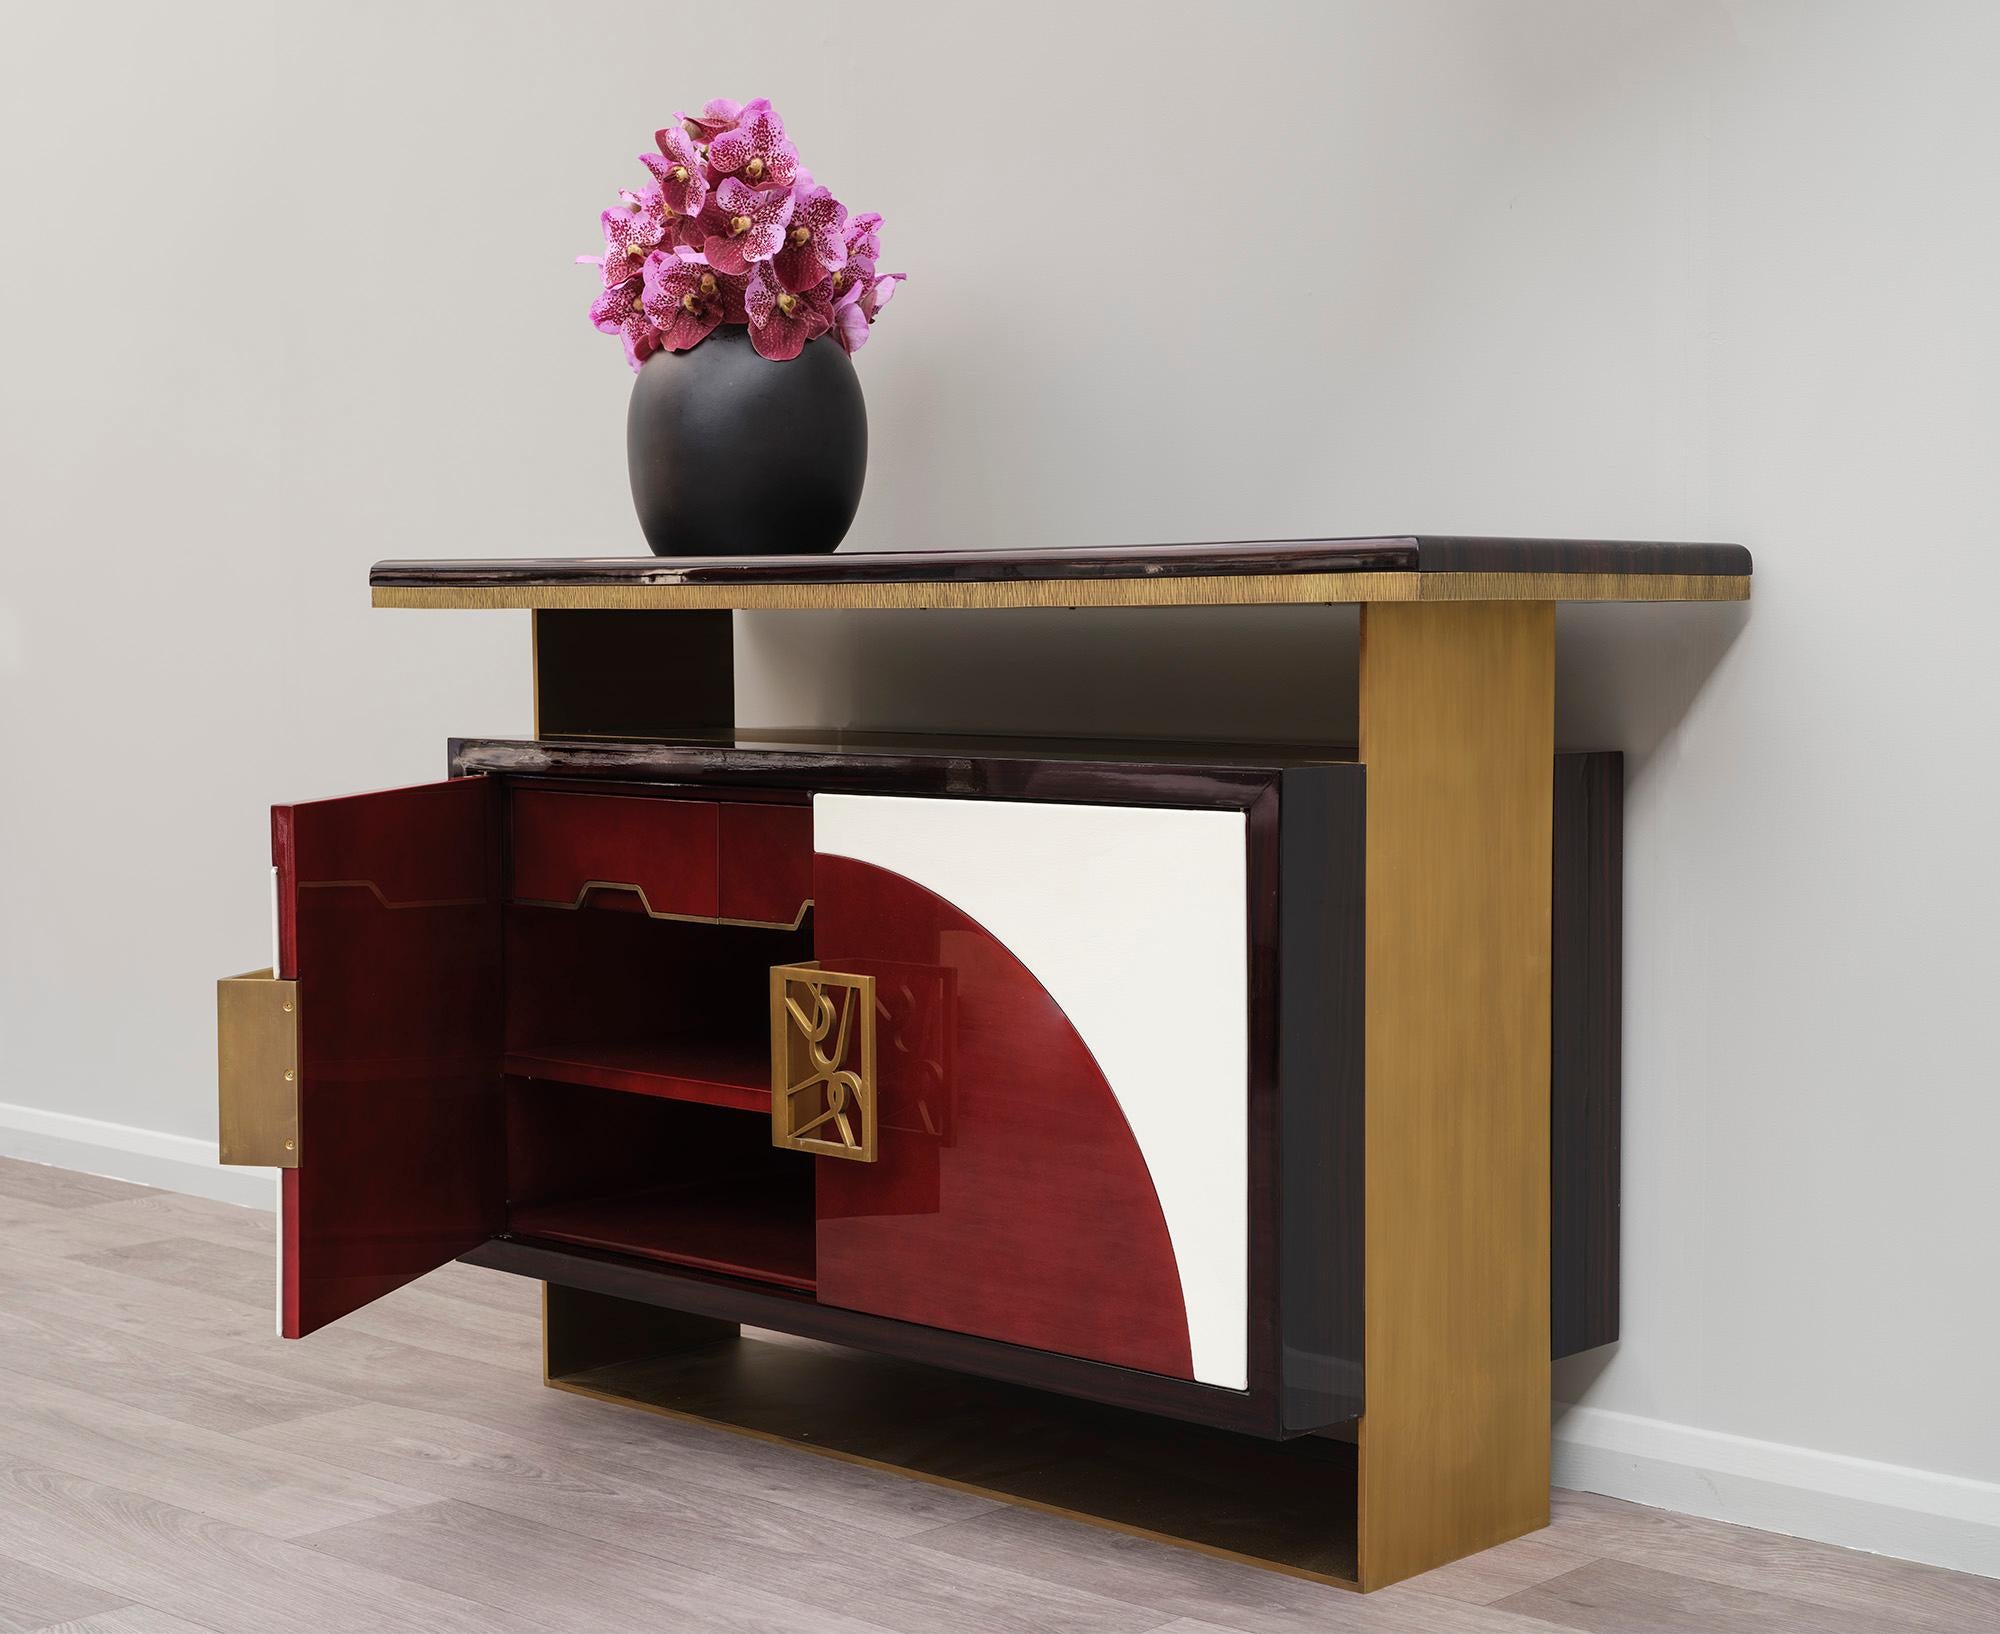 Art Deco 21st Century Modern Handcrafted Cabinet, in Lacquer and Brass by BelBar Studio For Sale